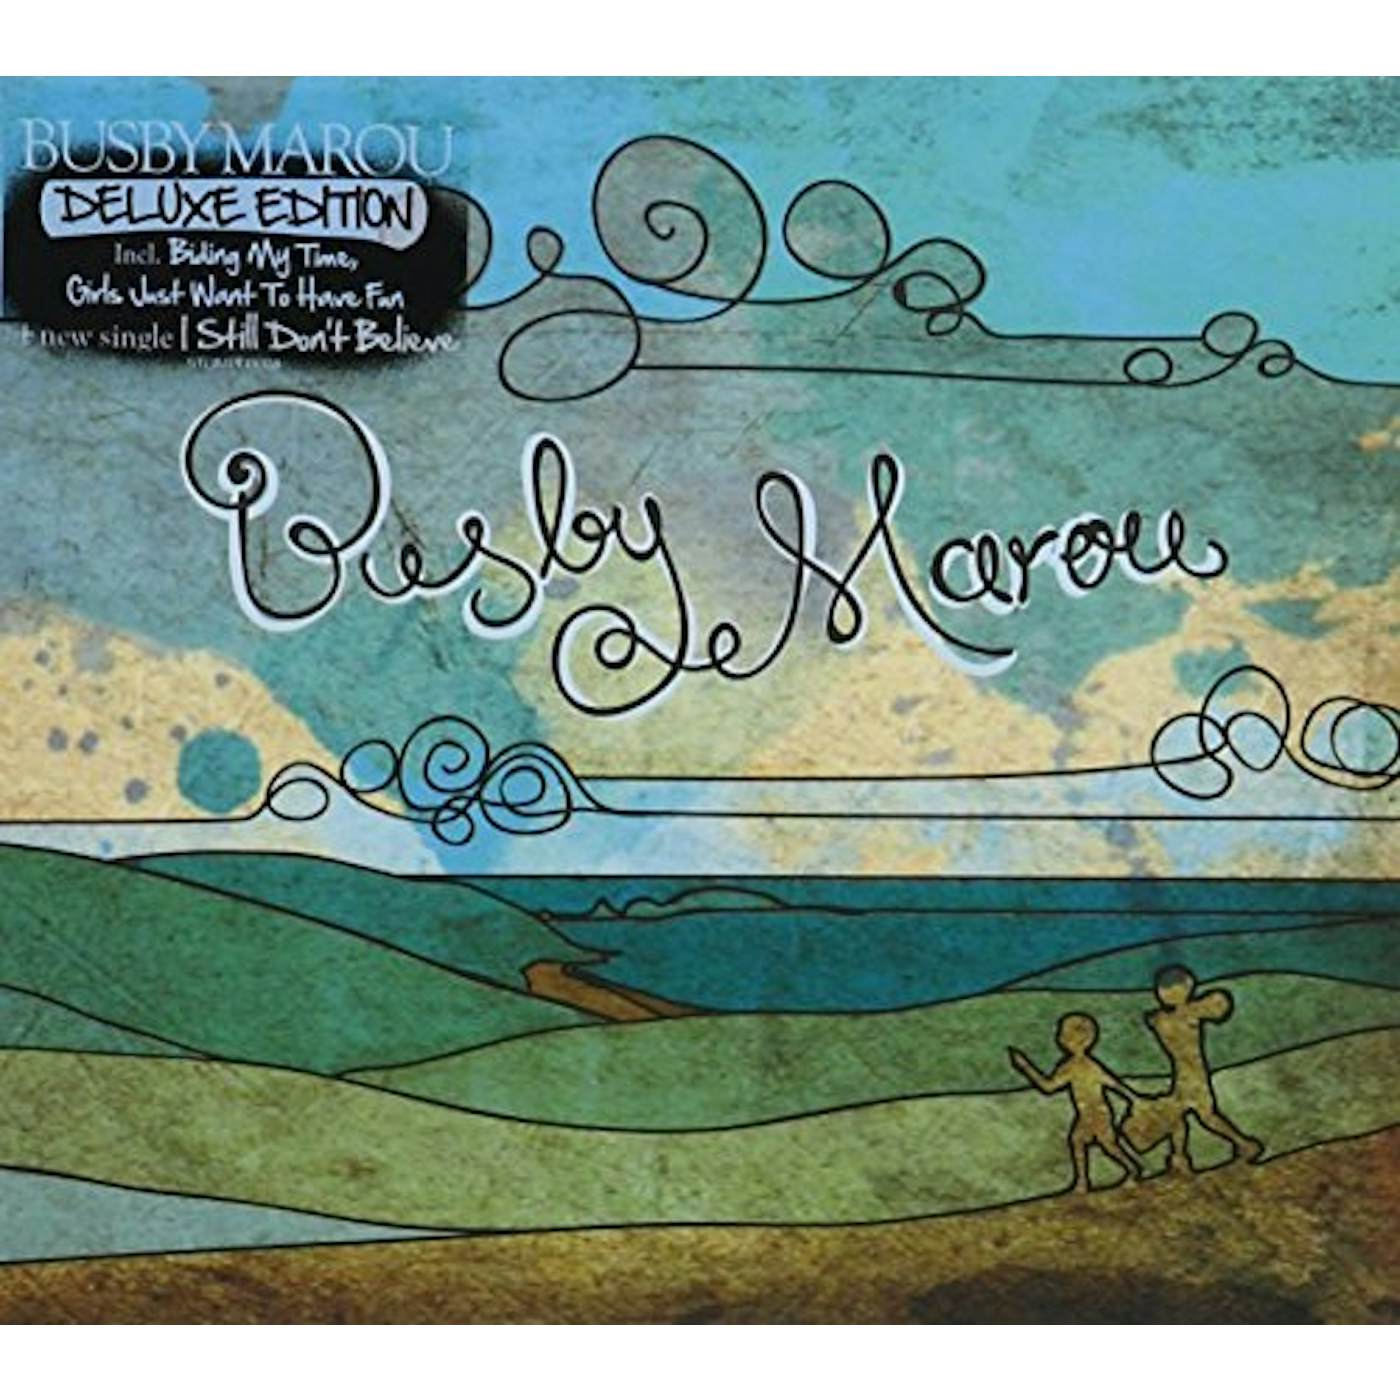 BUSBY MAROU (DELUXE EDITION) CD